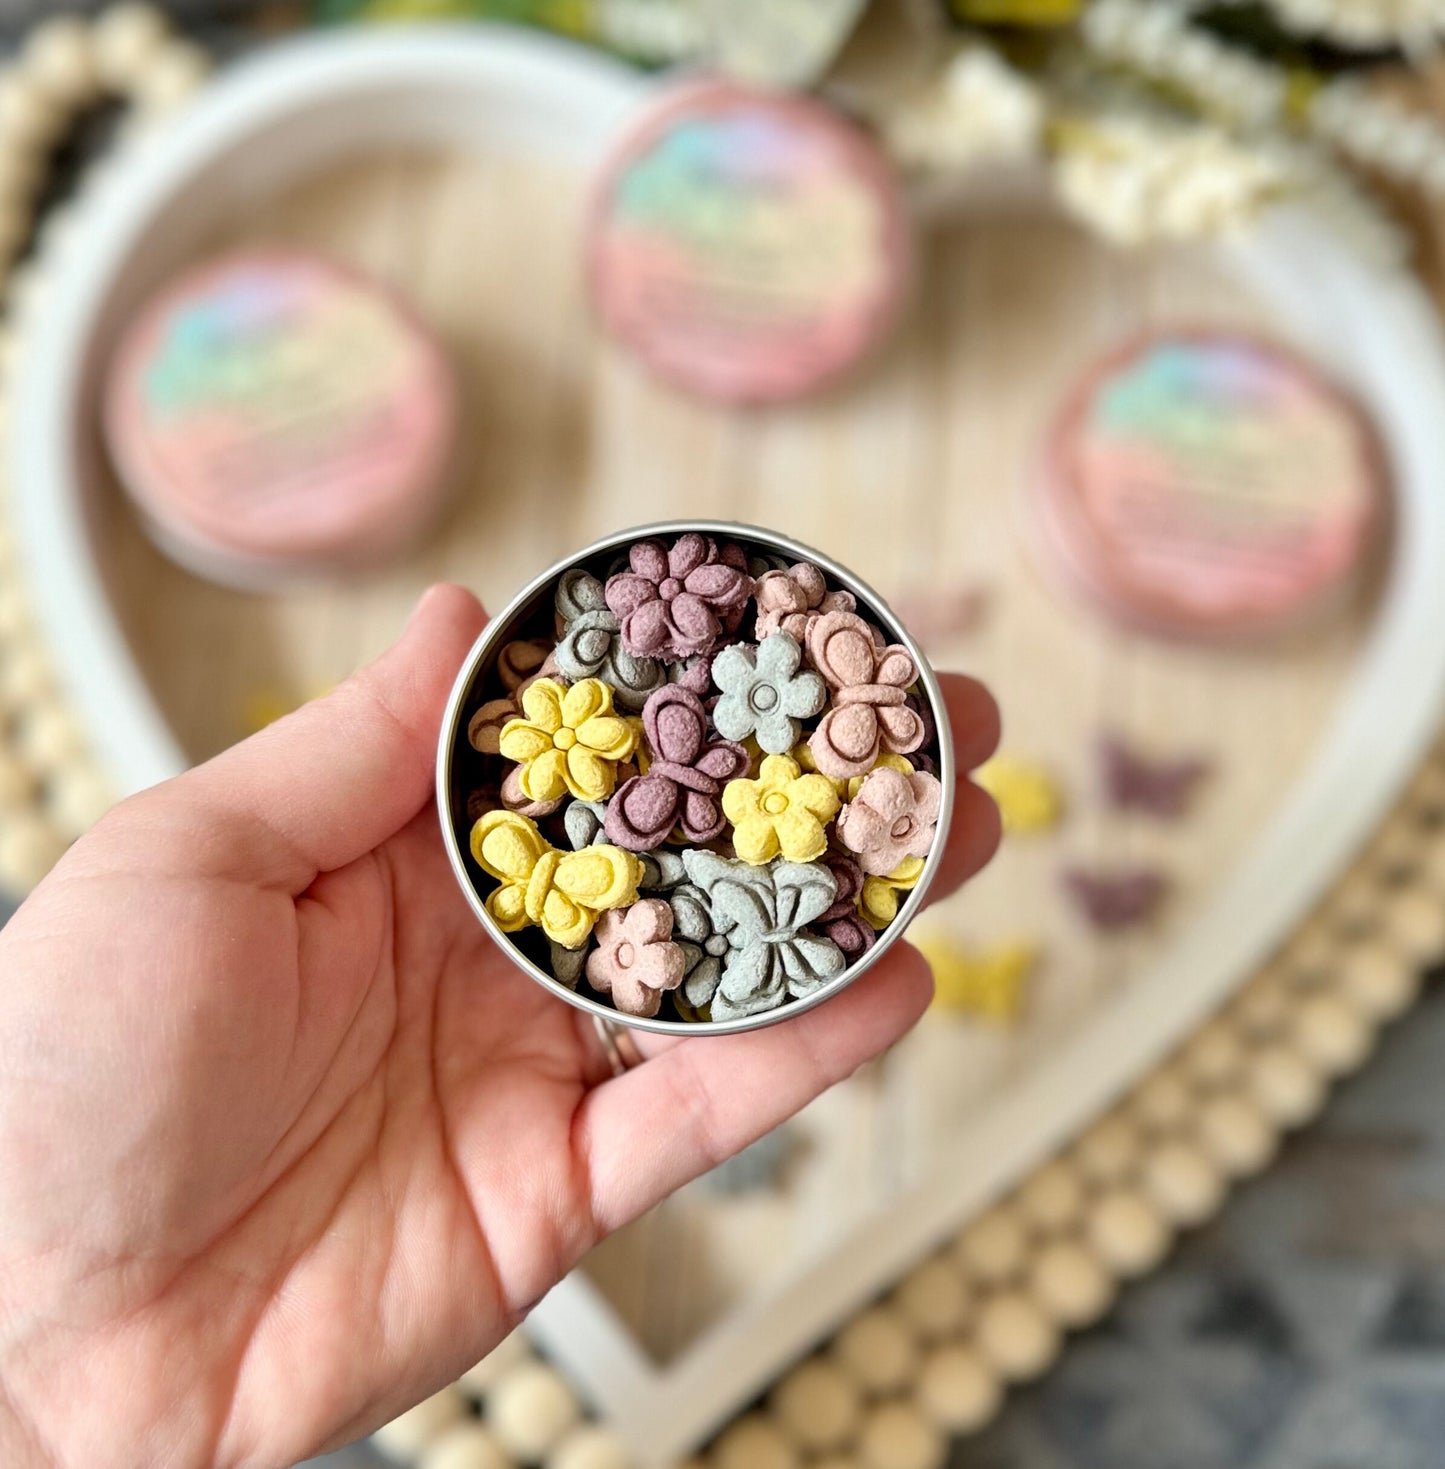 Blossoms & Butterflies~ Spring Inspired Bite Sized Treats for Rabbits, Guinea Pigs, Hamsters, Mice, and Small Pets, All Natural, Organic